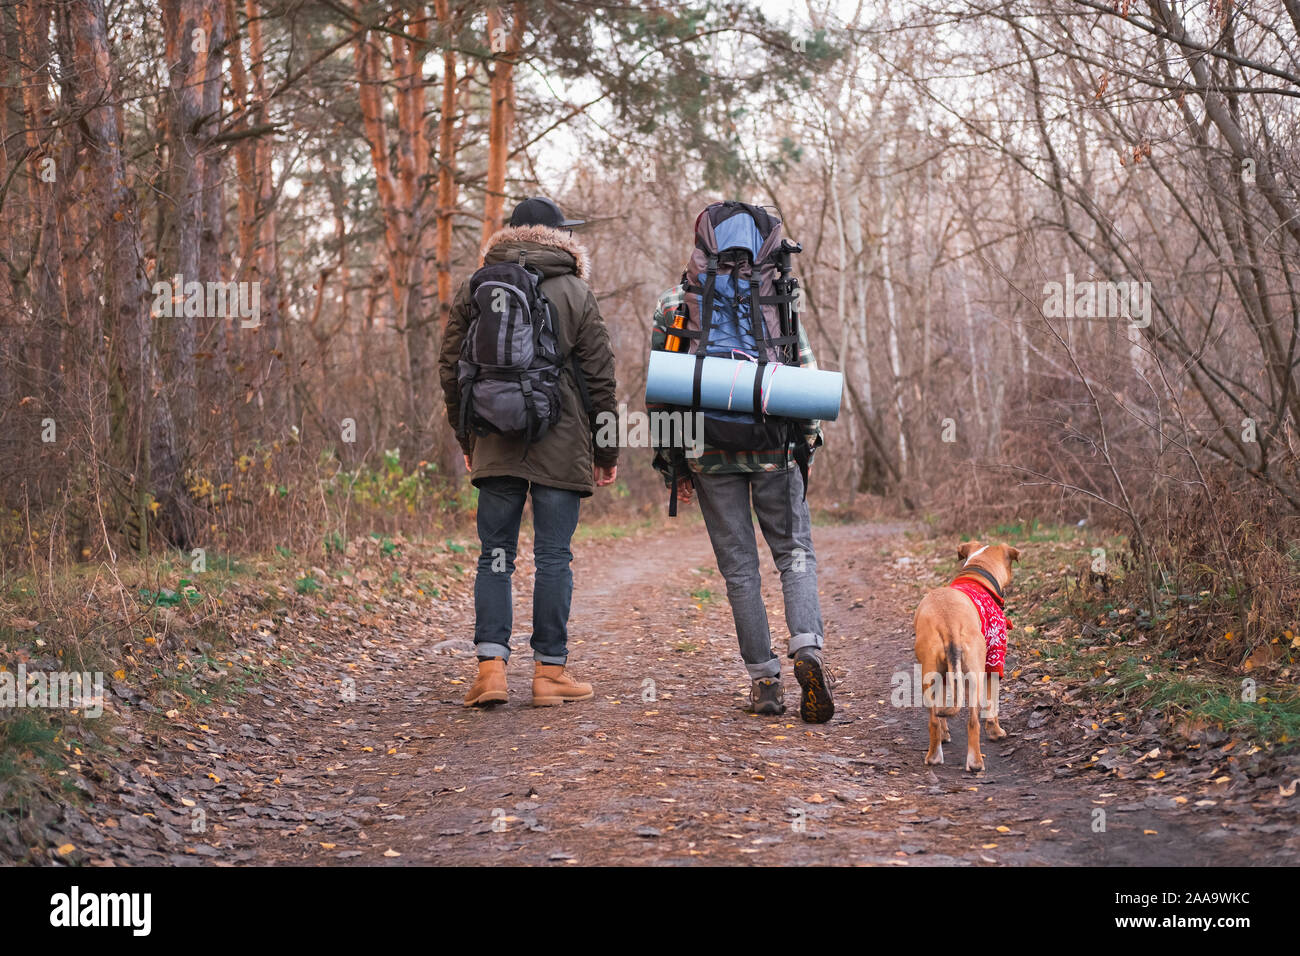 Active rest outdoors: two people with  their dog hiking in the forest. Getting away from the city and technology concept: backpackers and a dog enjoy Stock Photo